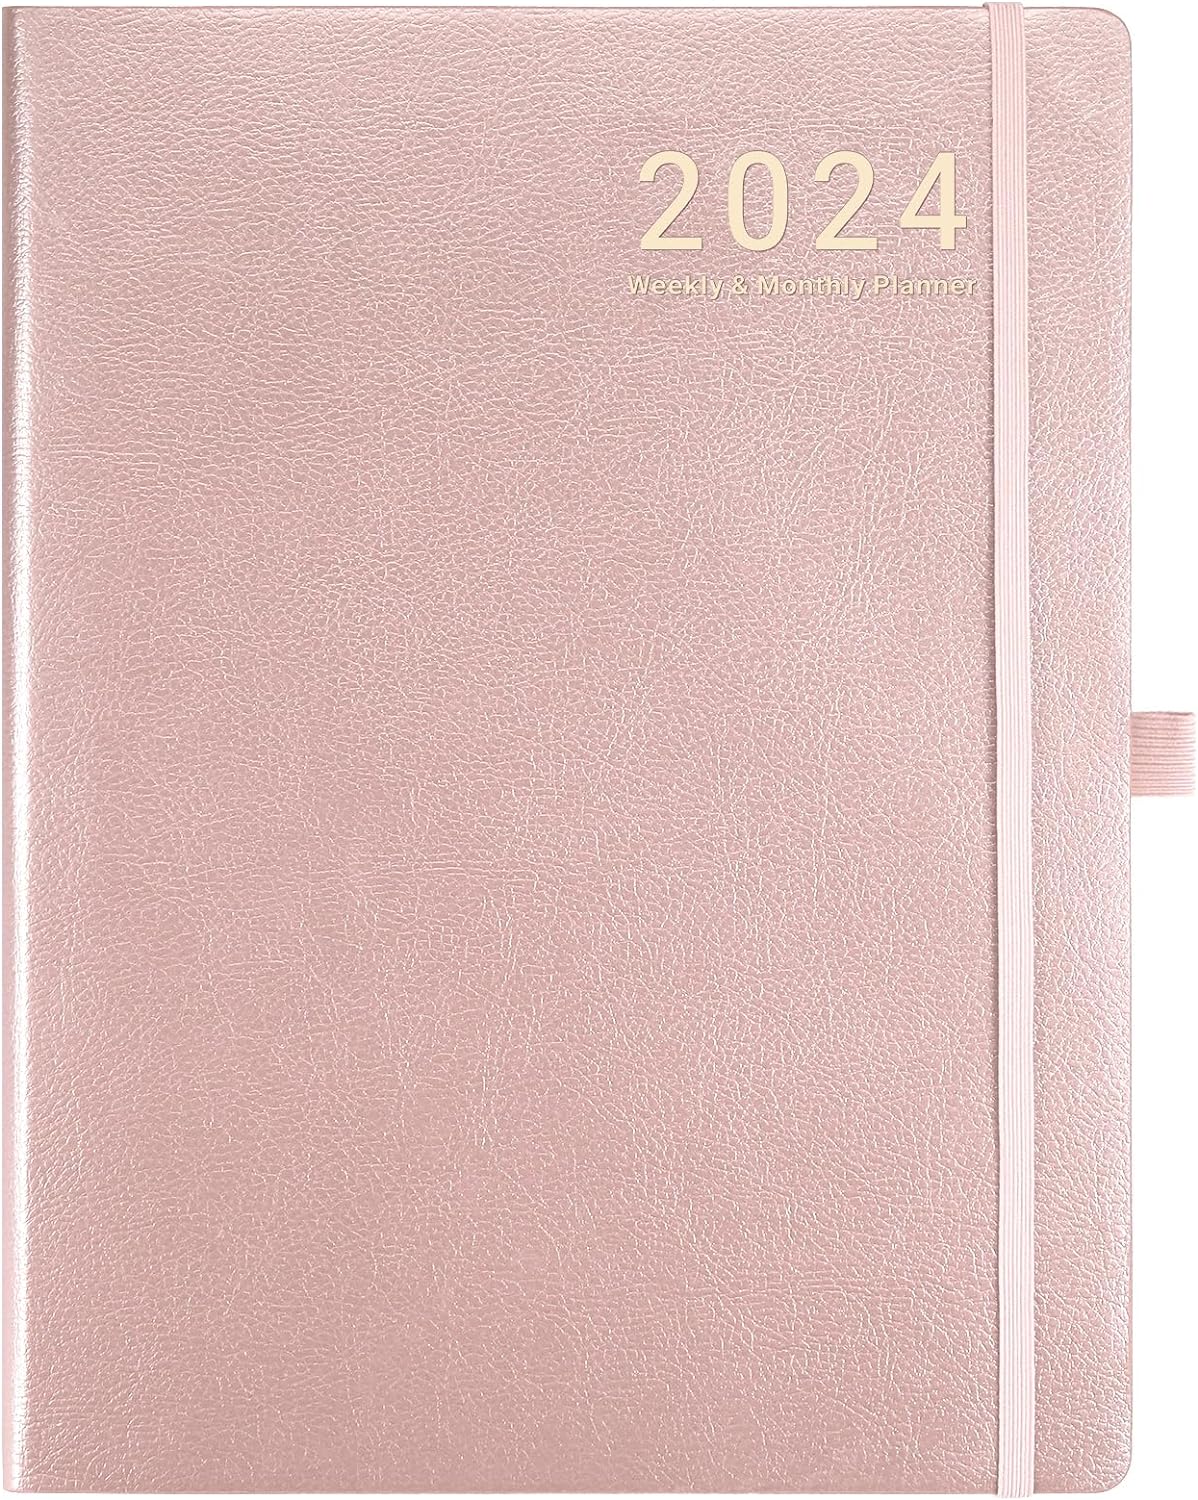 Leather Cover Planner with Thick Paper